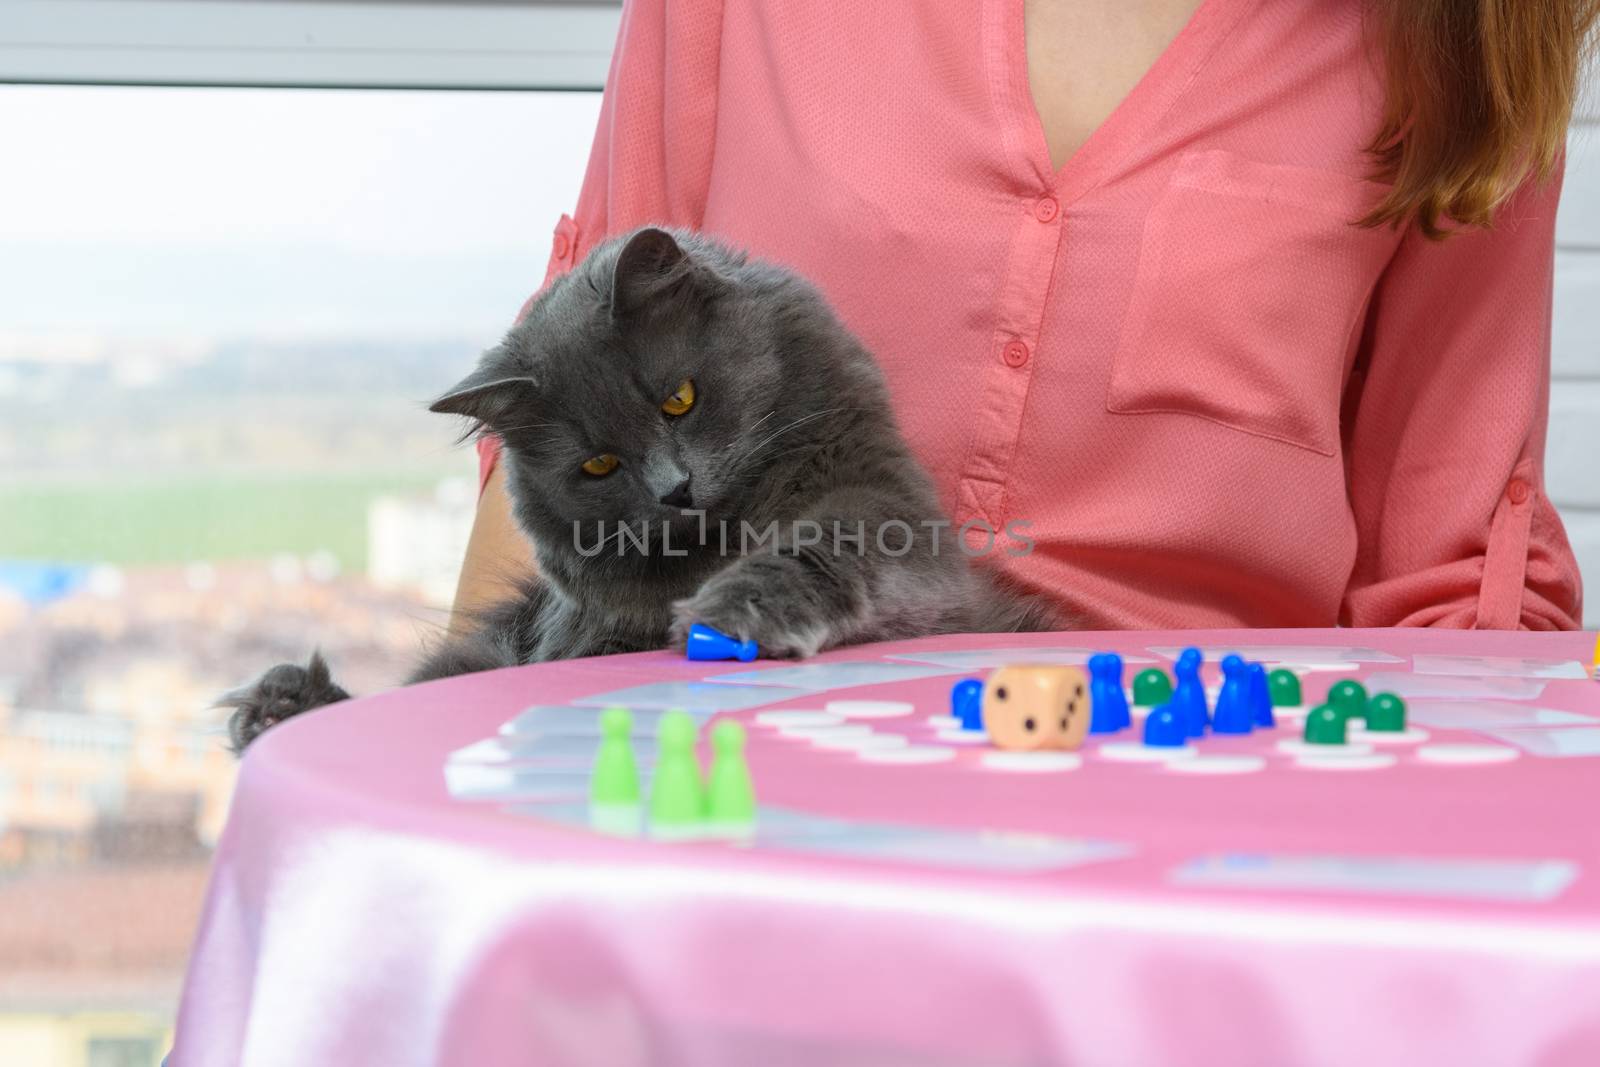 Home cat decided to play chips from a board game by Madhourse